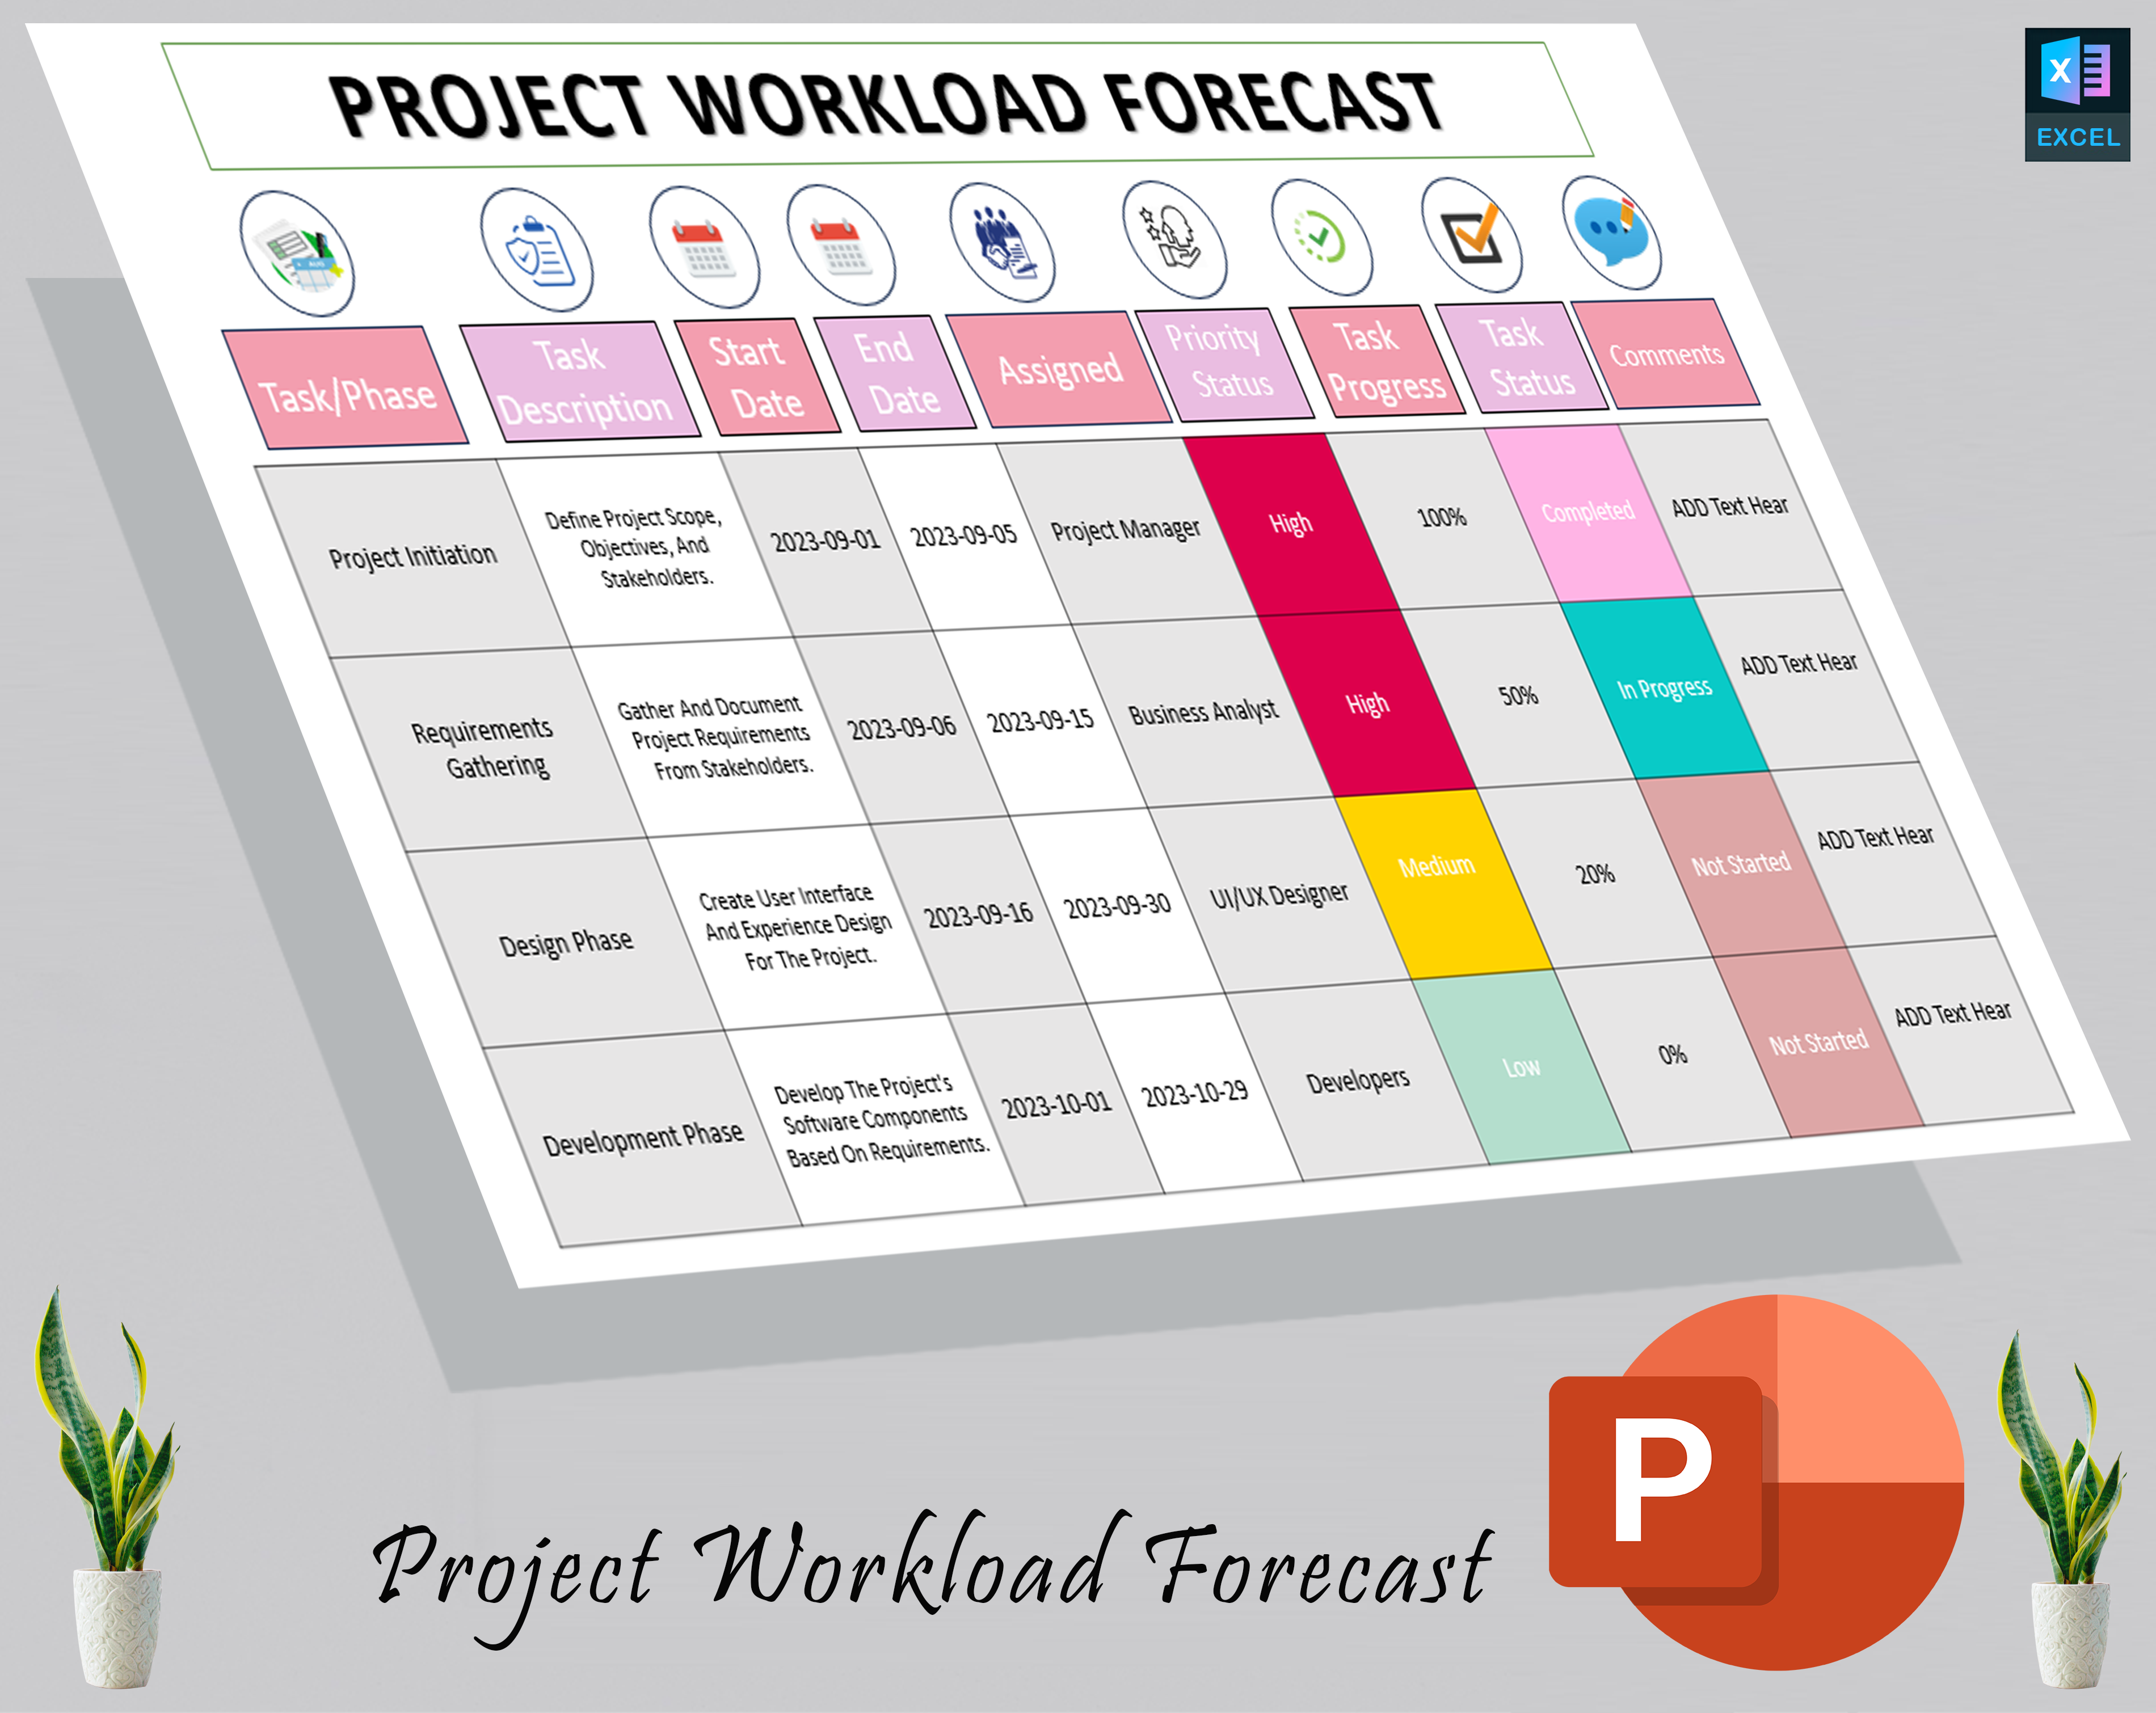 Project Workload Forecast